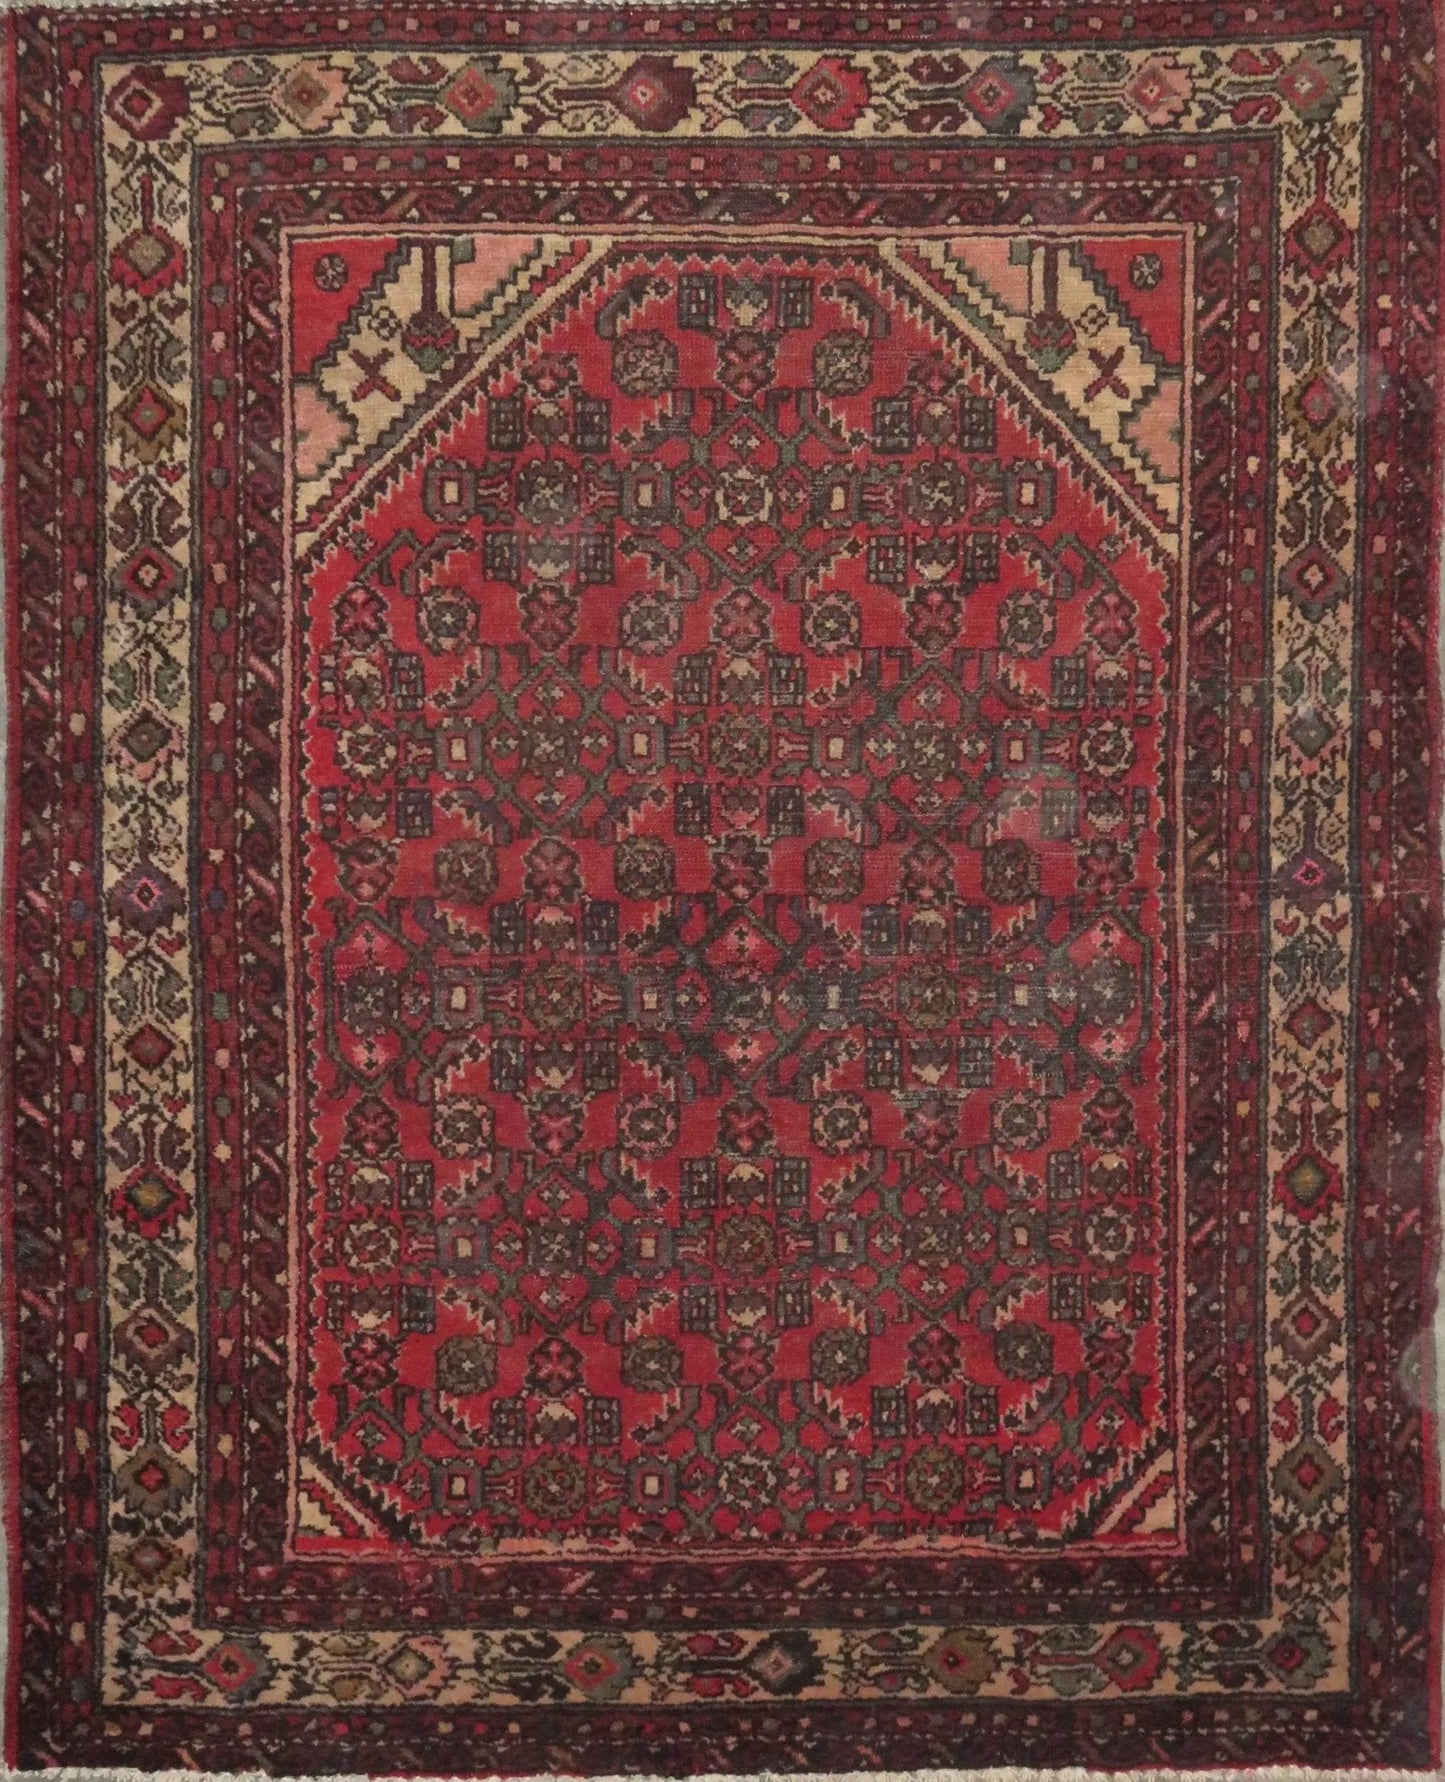 Hand-Knotted Persian Wool Rug _ Luxurious Vintage Design, 5'9" x 4'8", Artisan Crafted